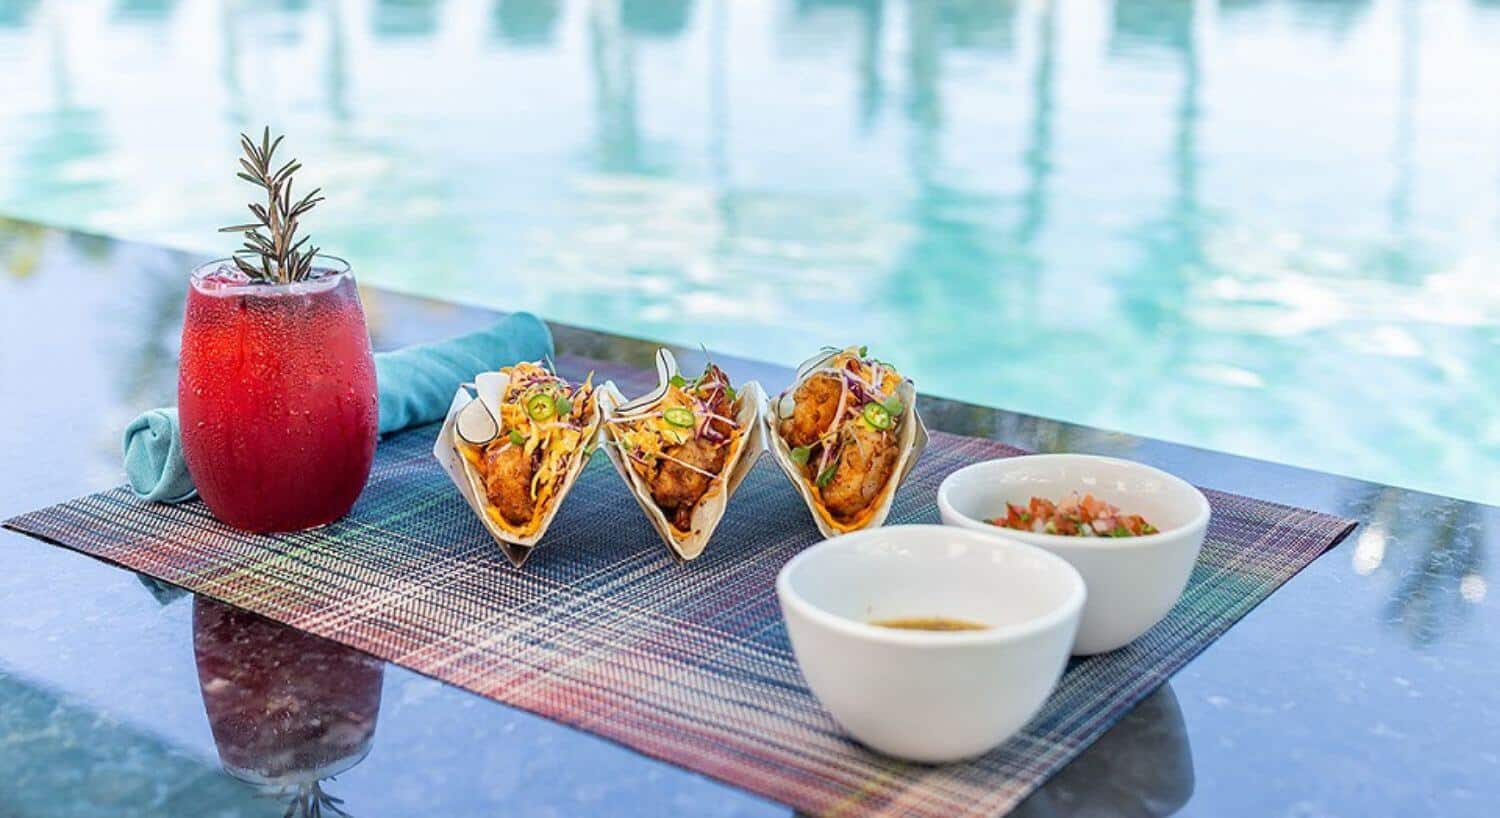 A trio of fish tacos on a colorful placemat with bowls of salsa on the side, a turquoise napkin, and a red cocktail with a sprig of fresh rosemary, in front of a glimmering pool.